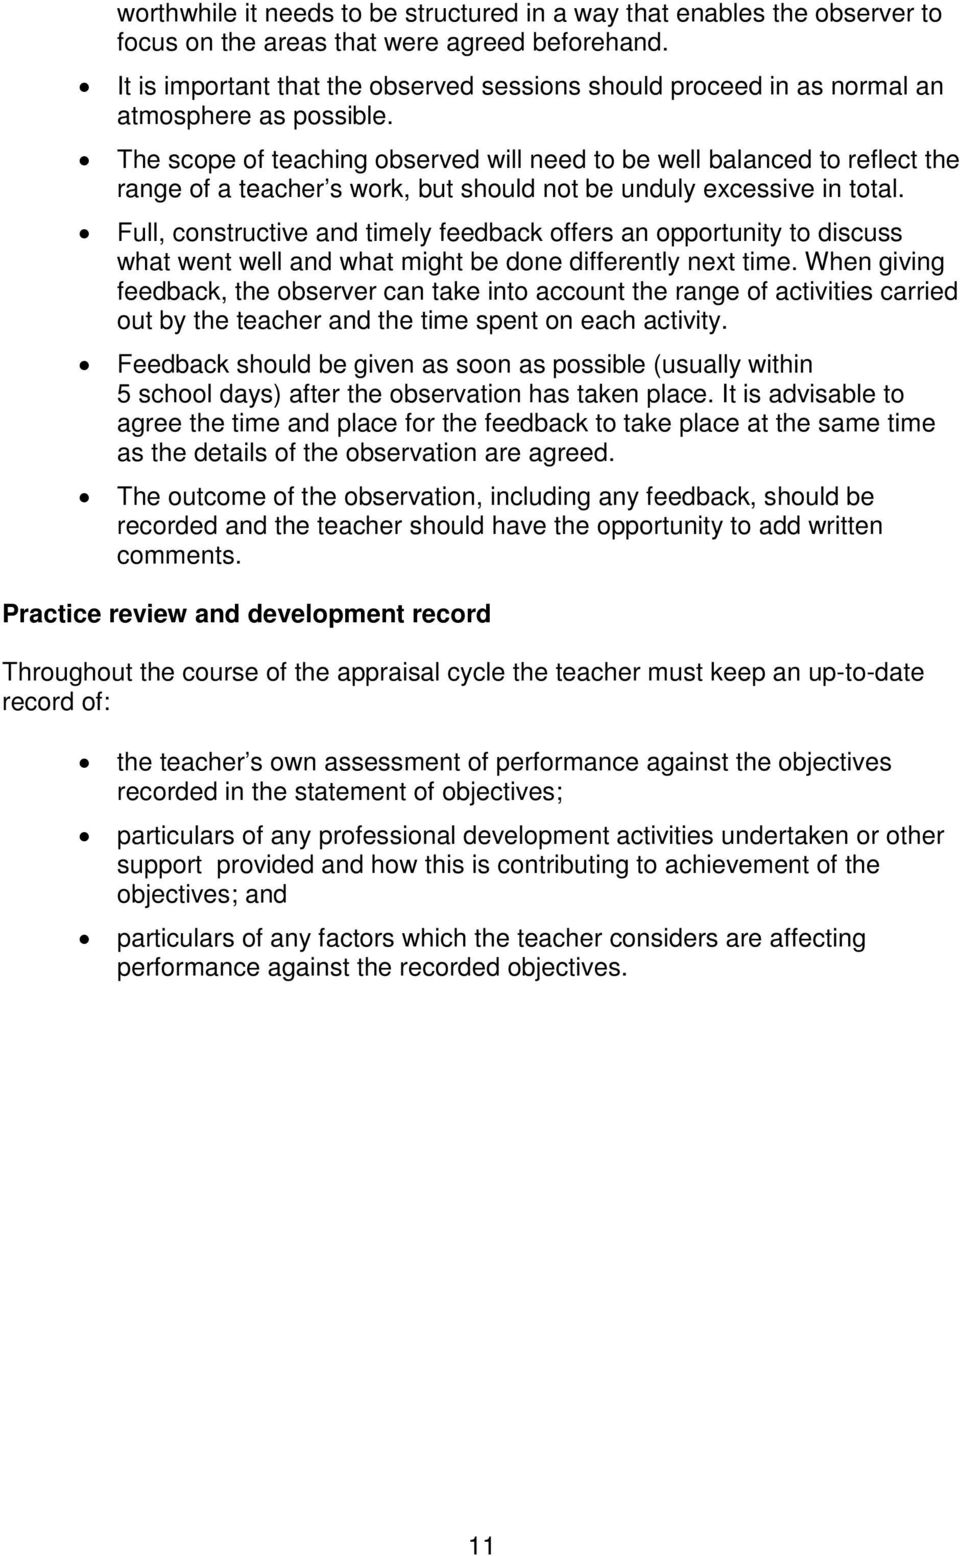 The scope of teaching observed will need to be well balanced to reflect the range of a teacher s work, but should not be unduly excessive in total.